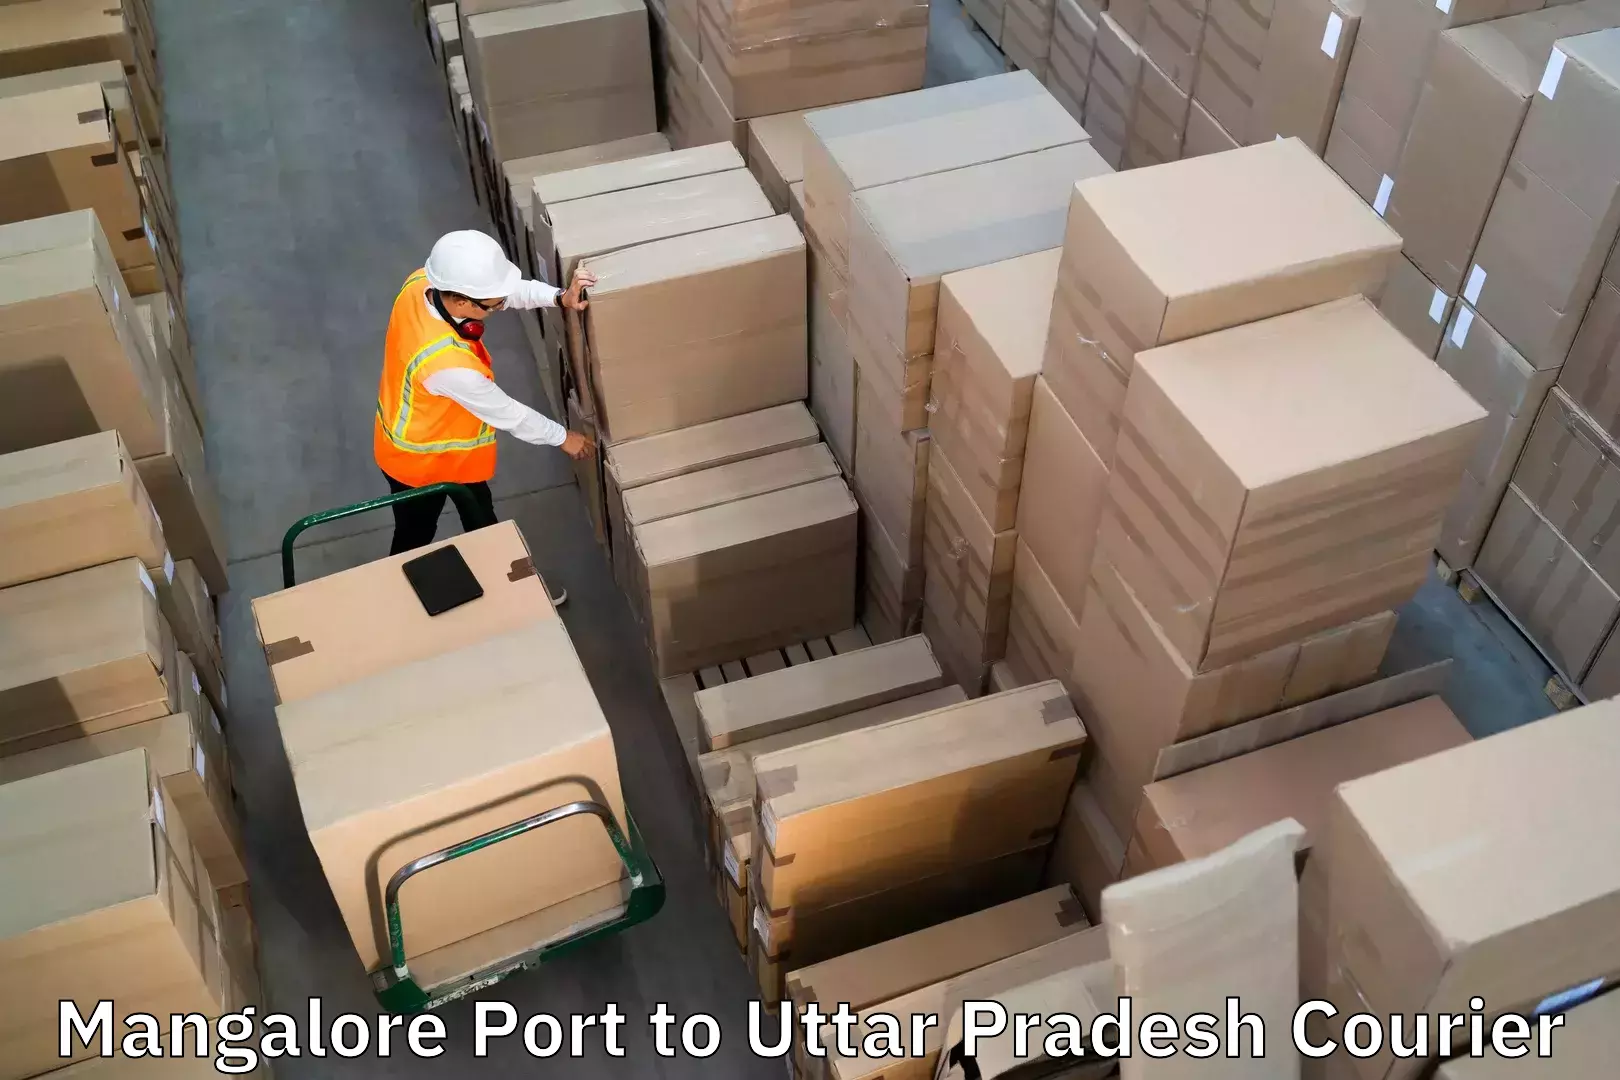 Excess baggage transport Mangalore Port to Atarra